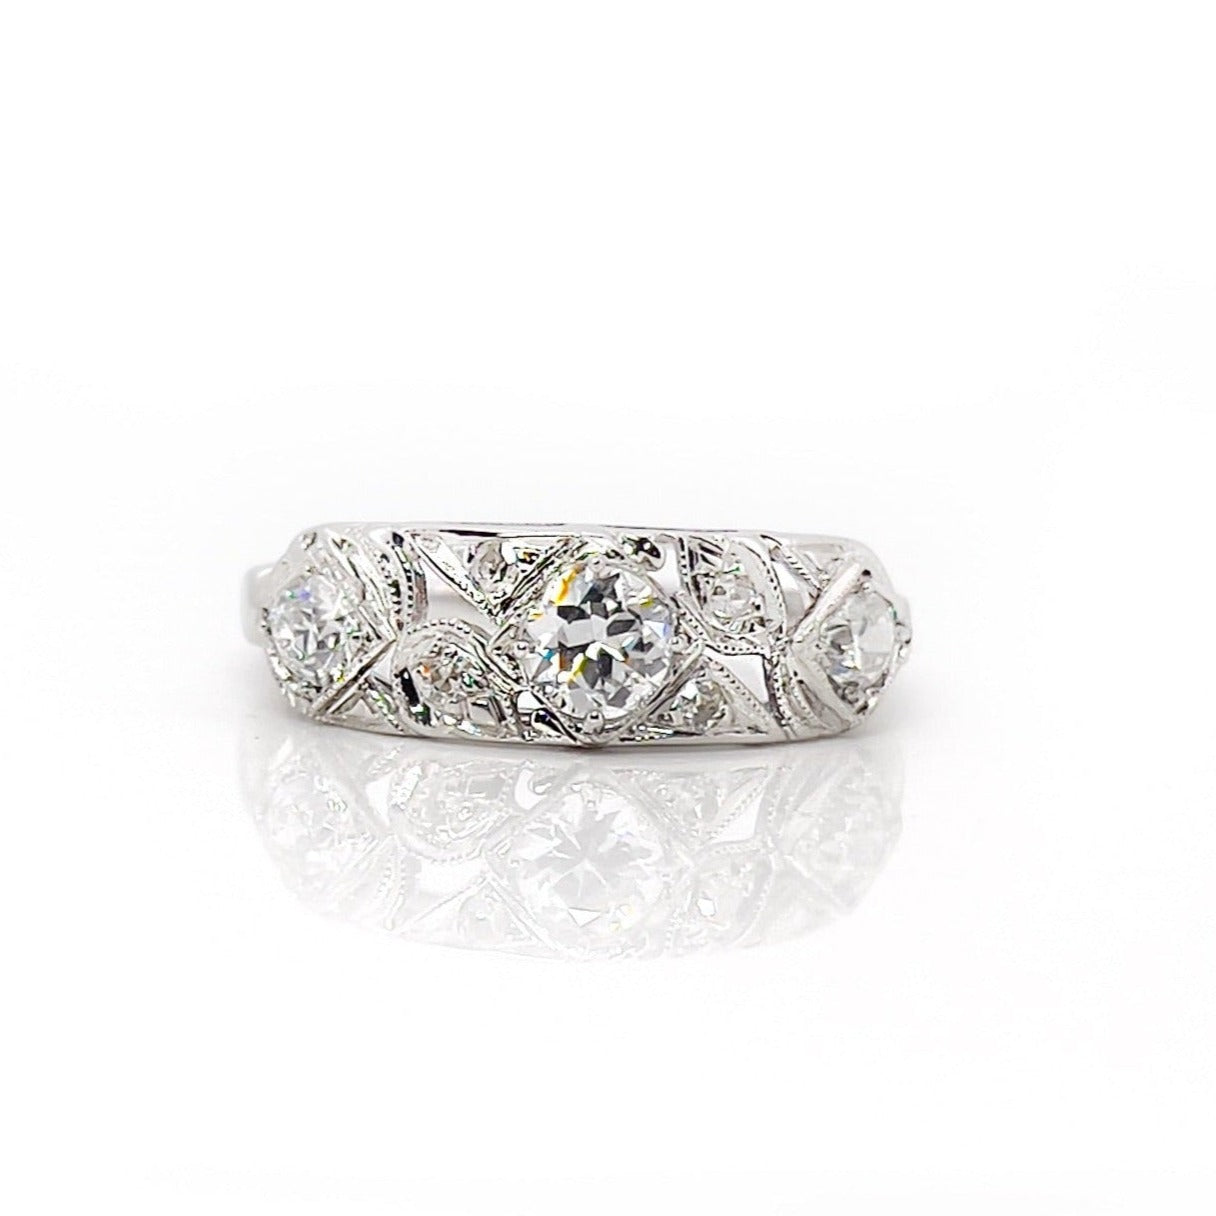 Vintage Old European, Transitional, and Single Cut Diamond Ring, 0.70 cts, 14K